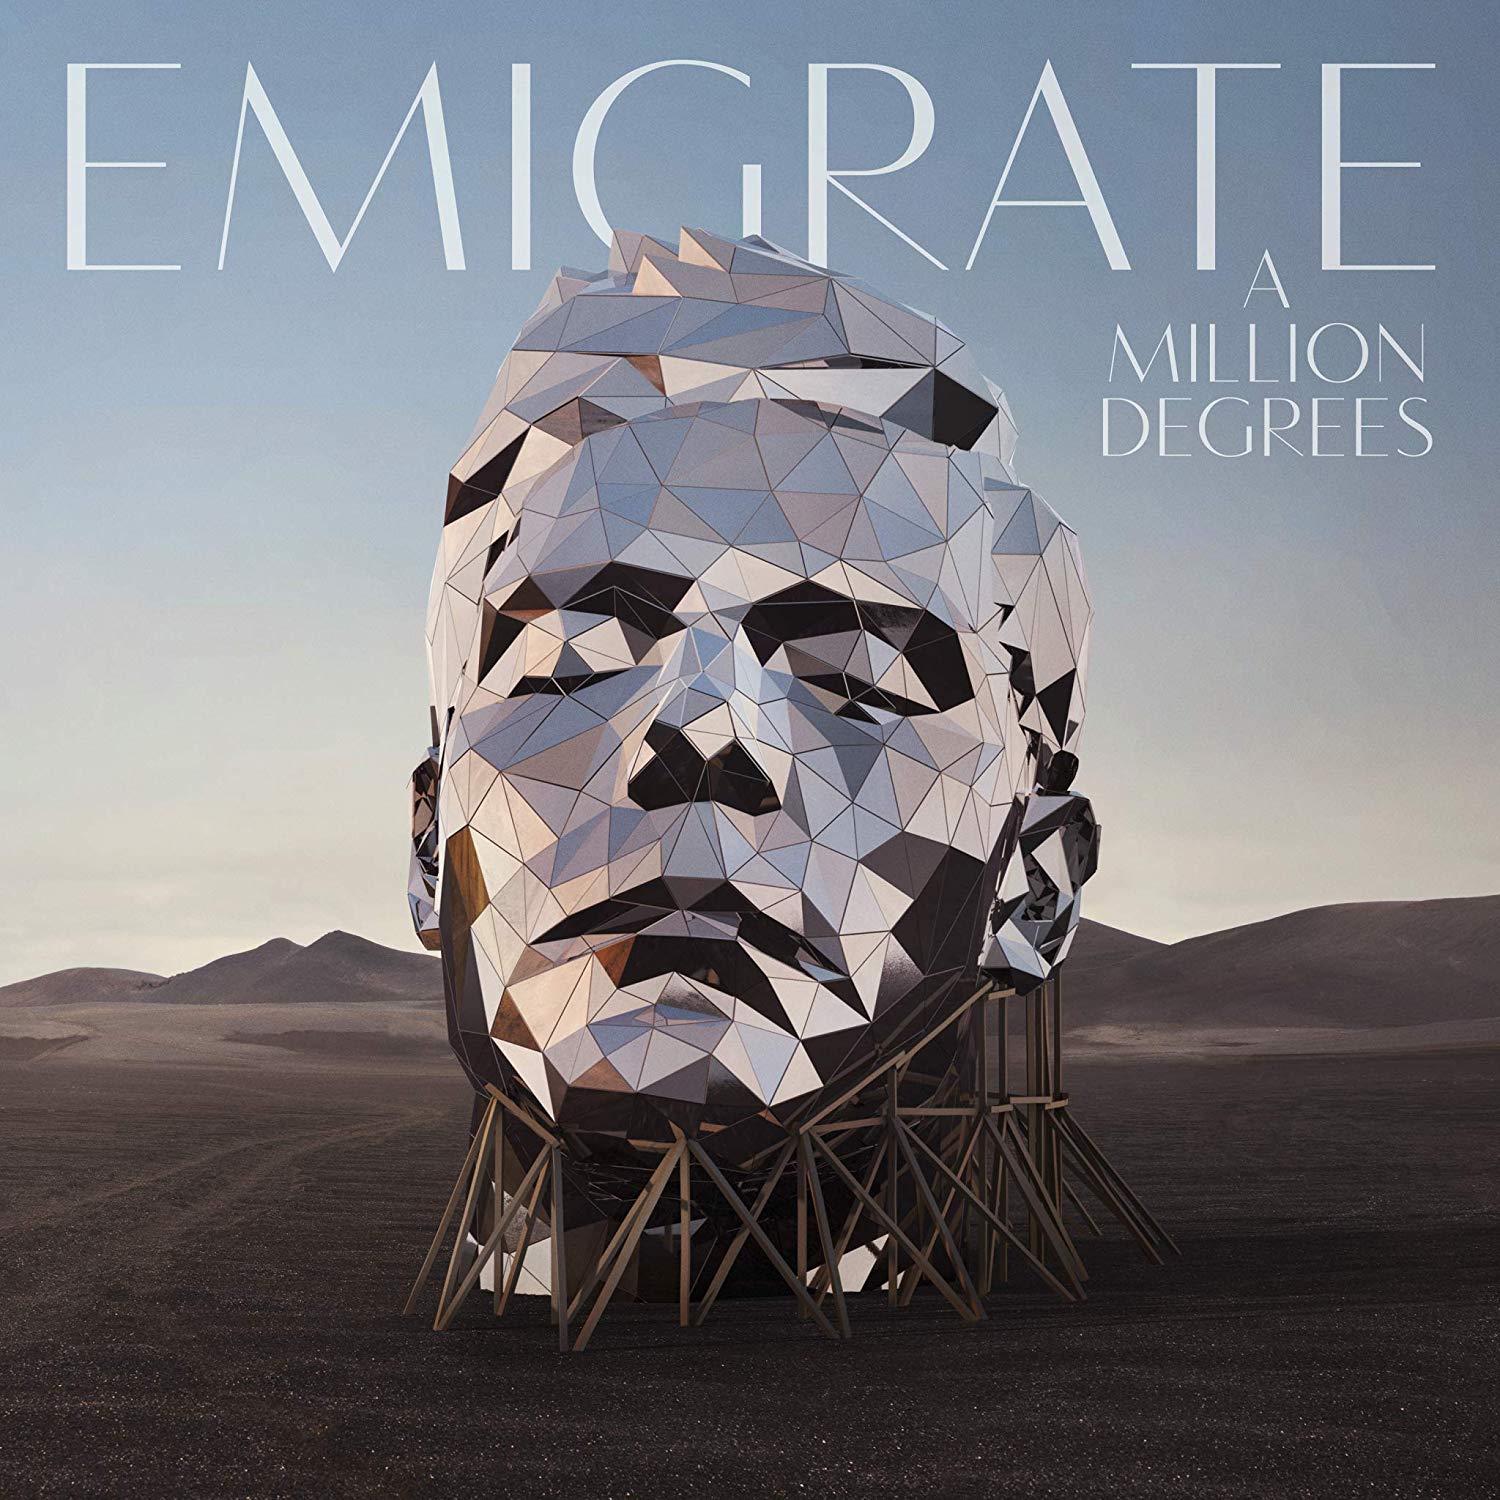 Emigrate : A Million Degrees